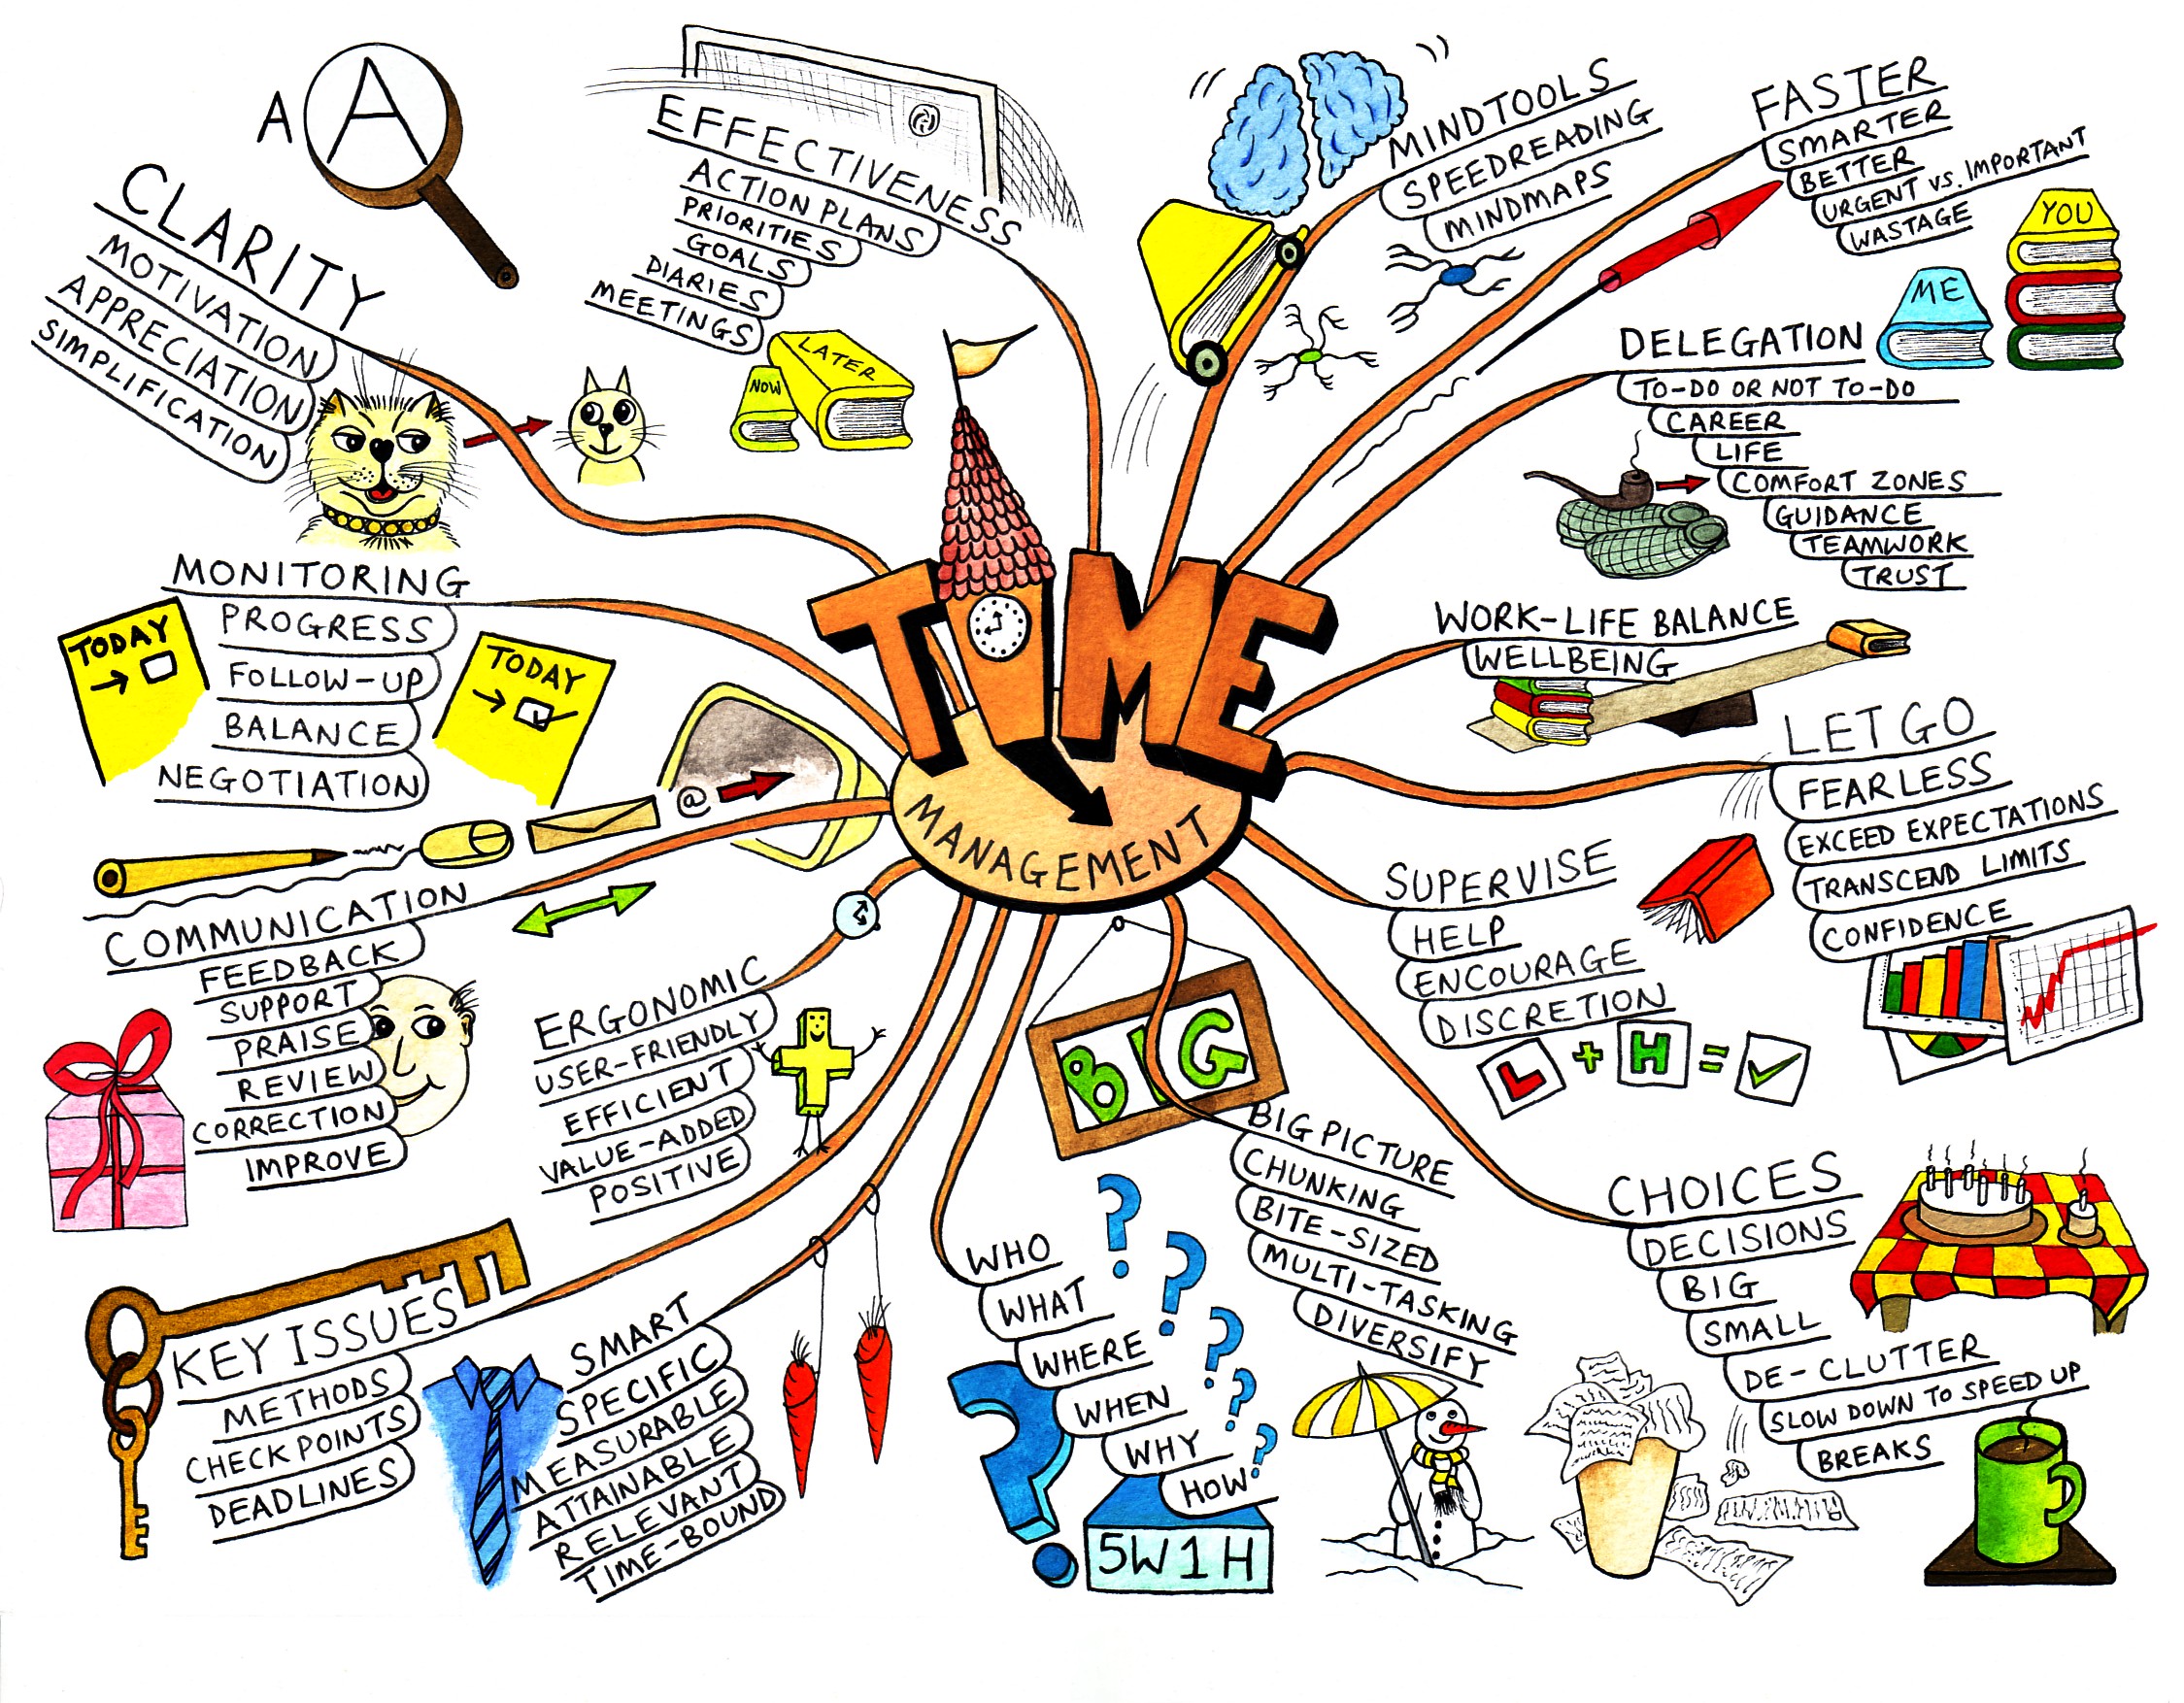 How To Use Mind Maps To Brainstorm And Organize Ideas